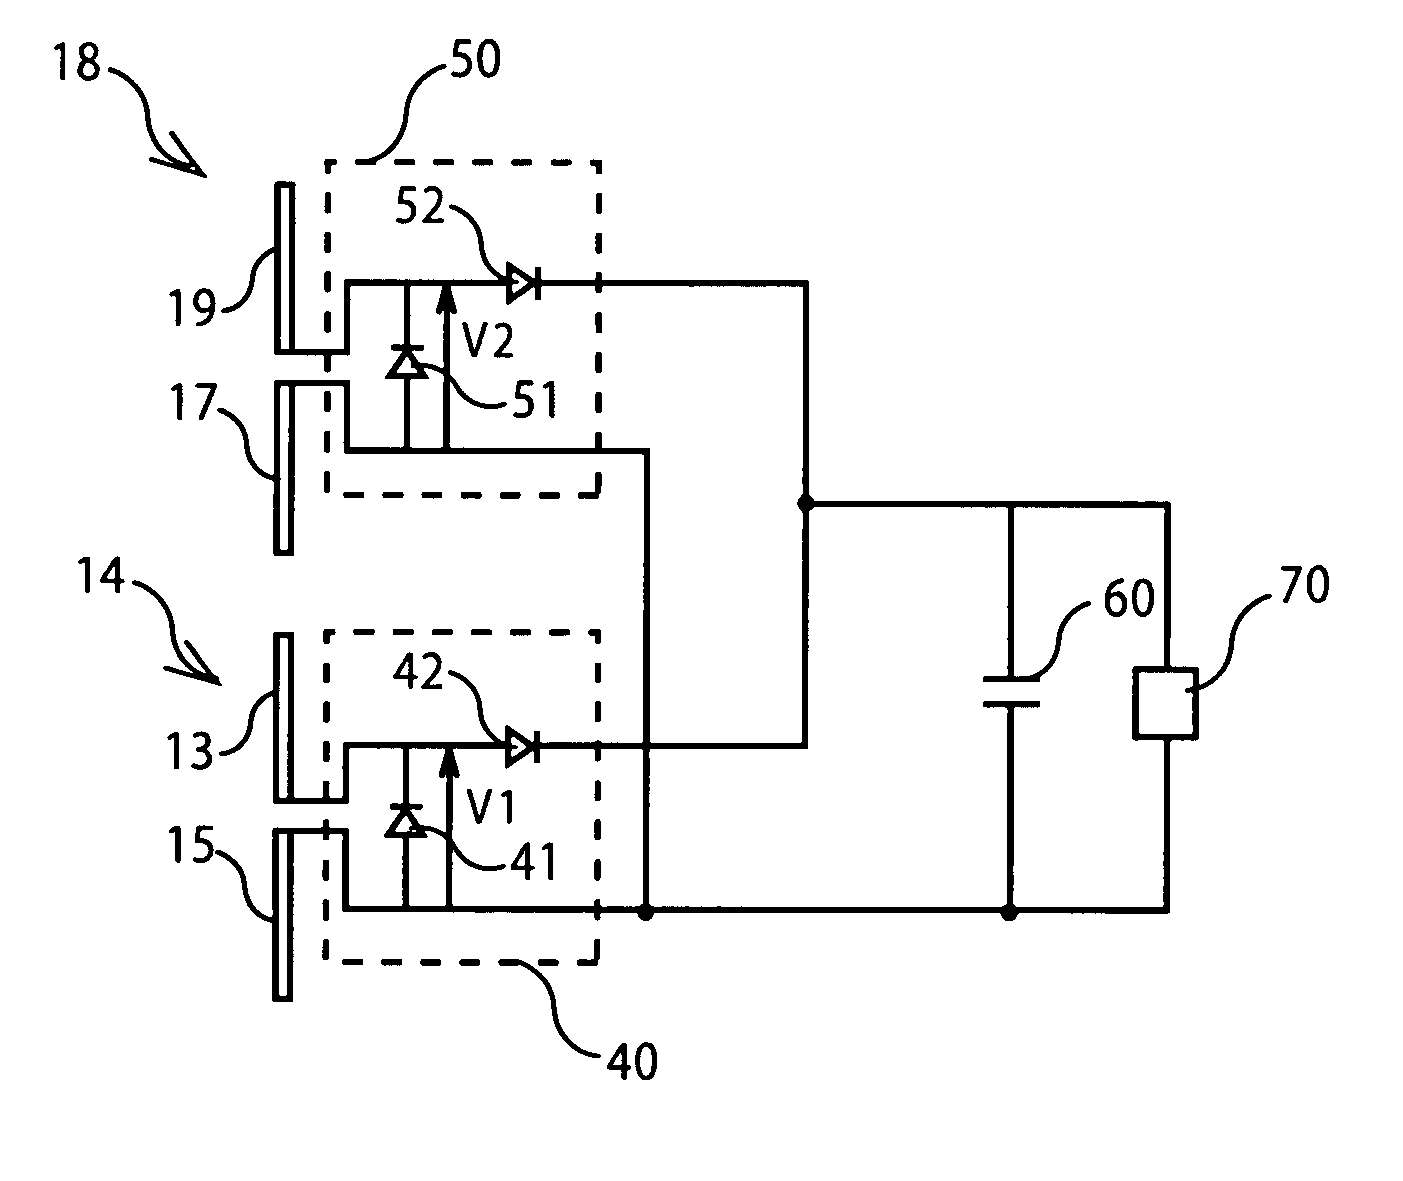 Contactless radiofrequency device featuring several antennas and related antenna selection circuit